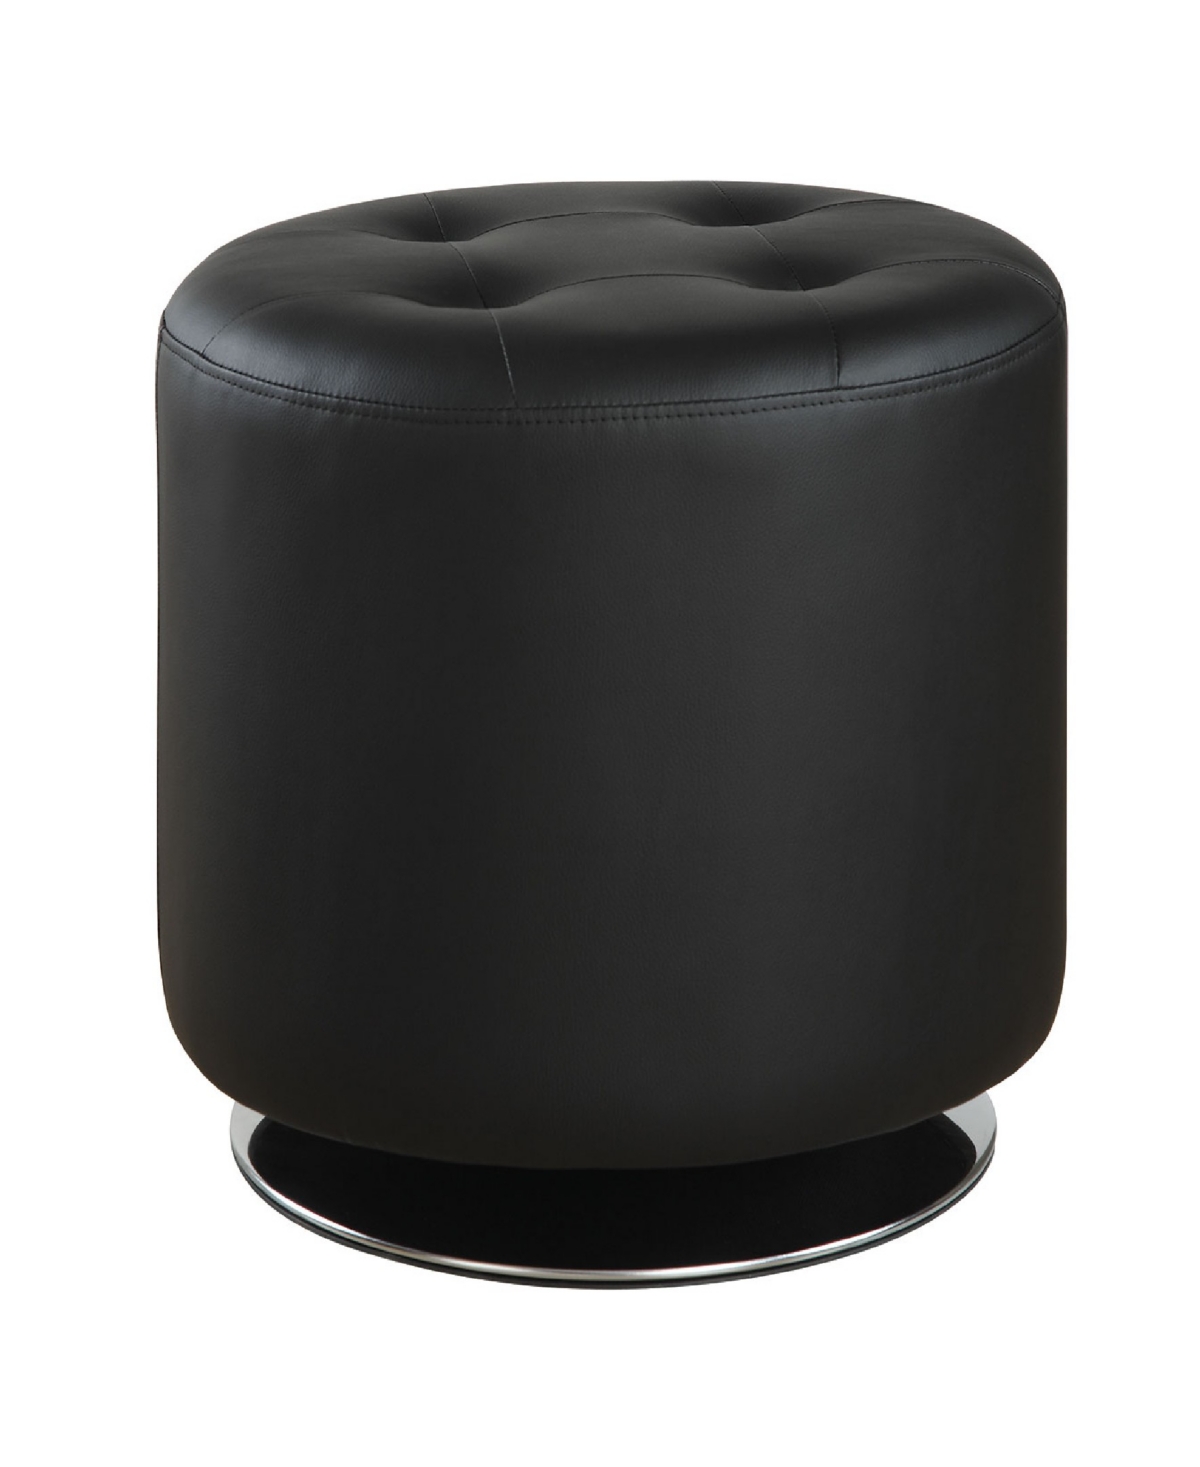 Coaster Home Furnishings Covina Round Upholstered Ottoman In Black